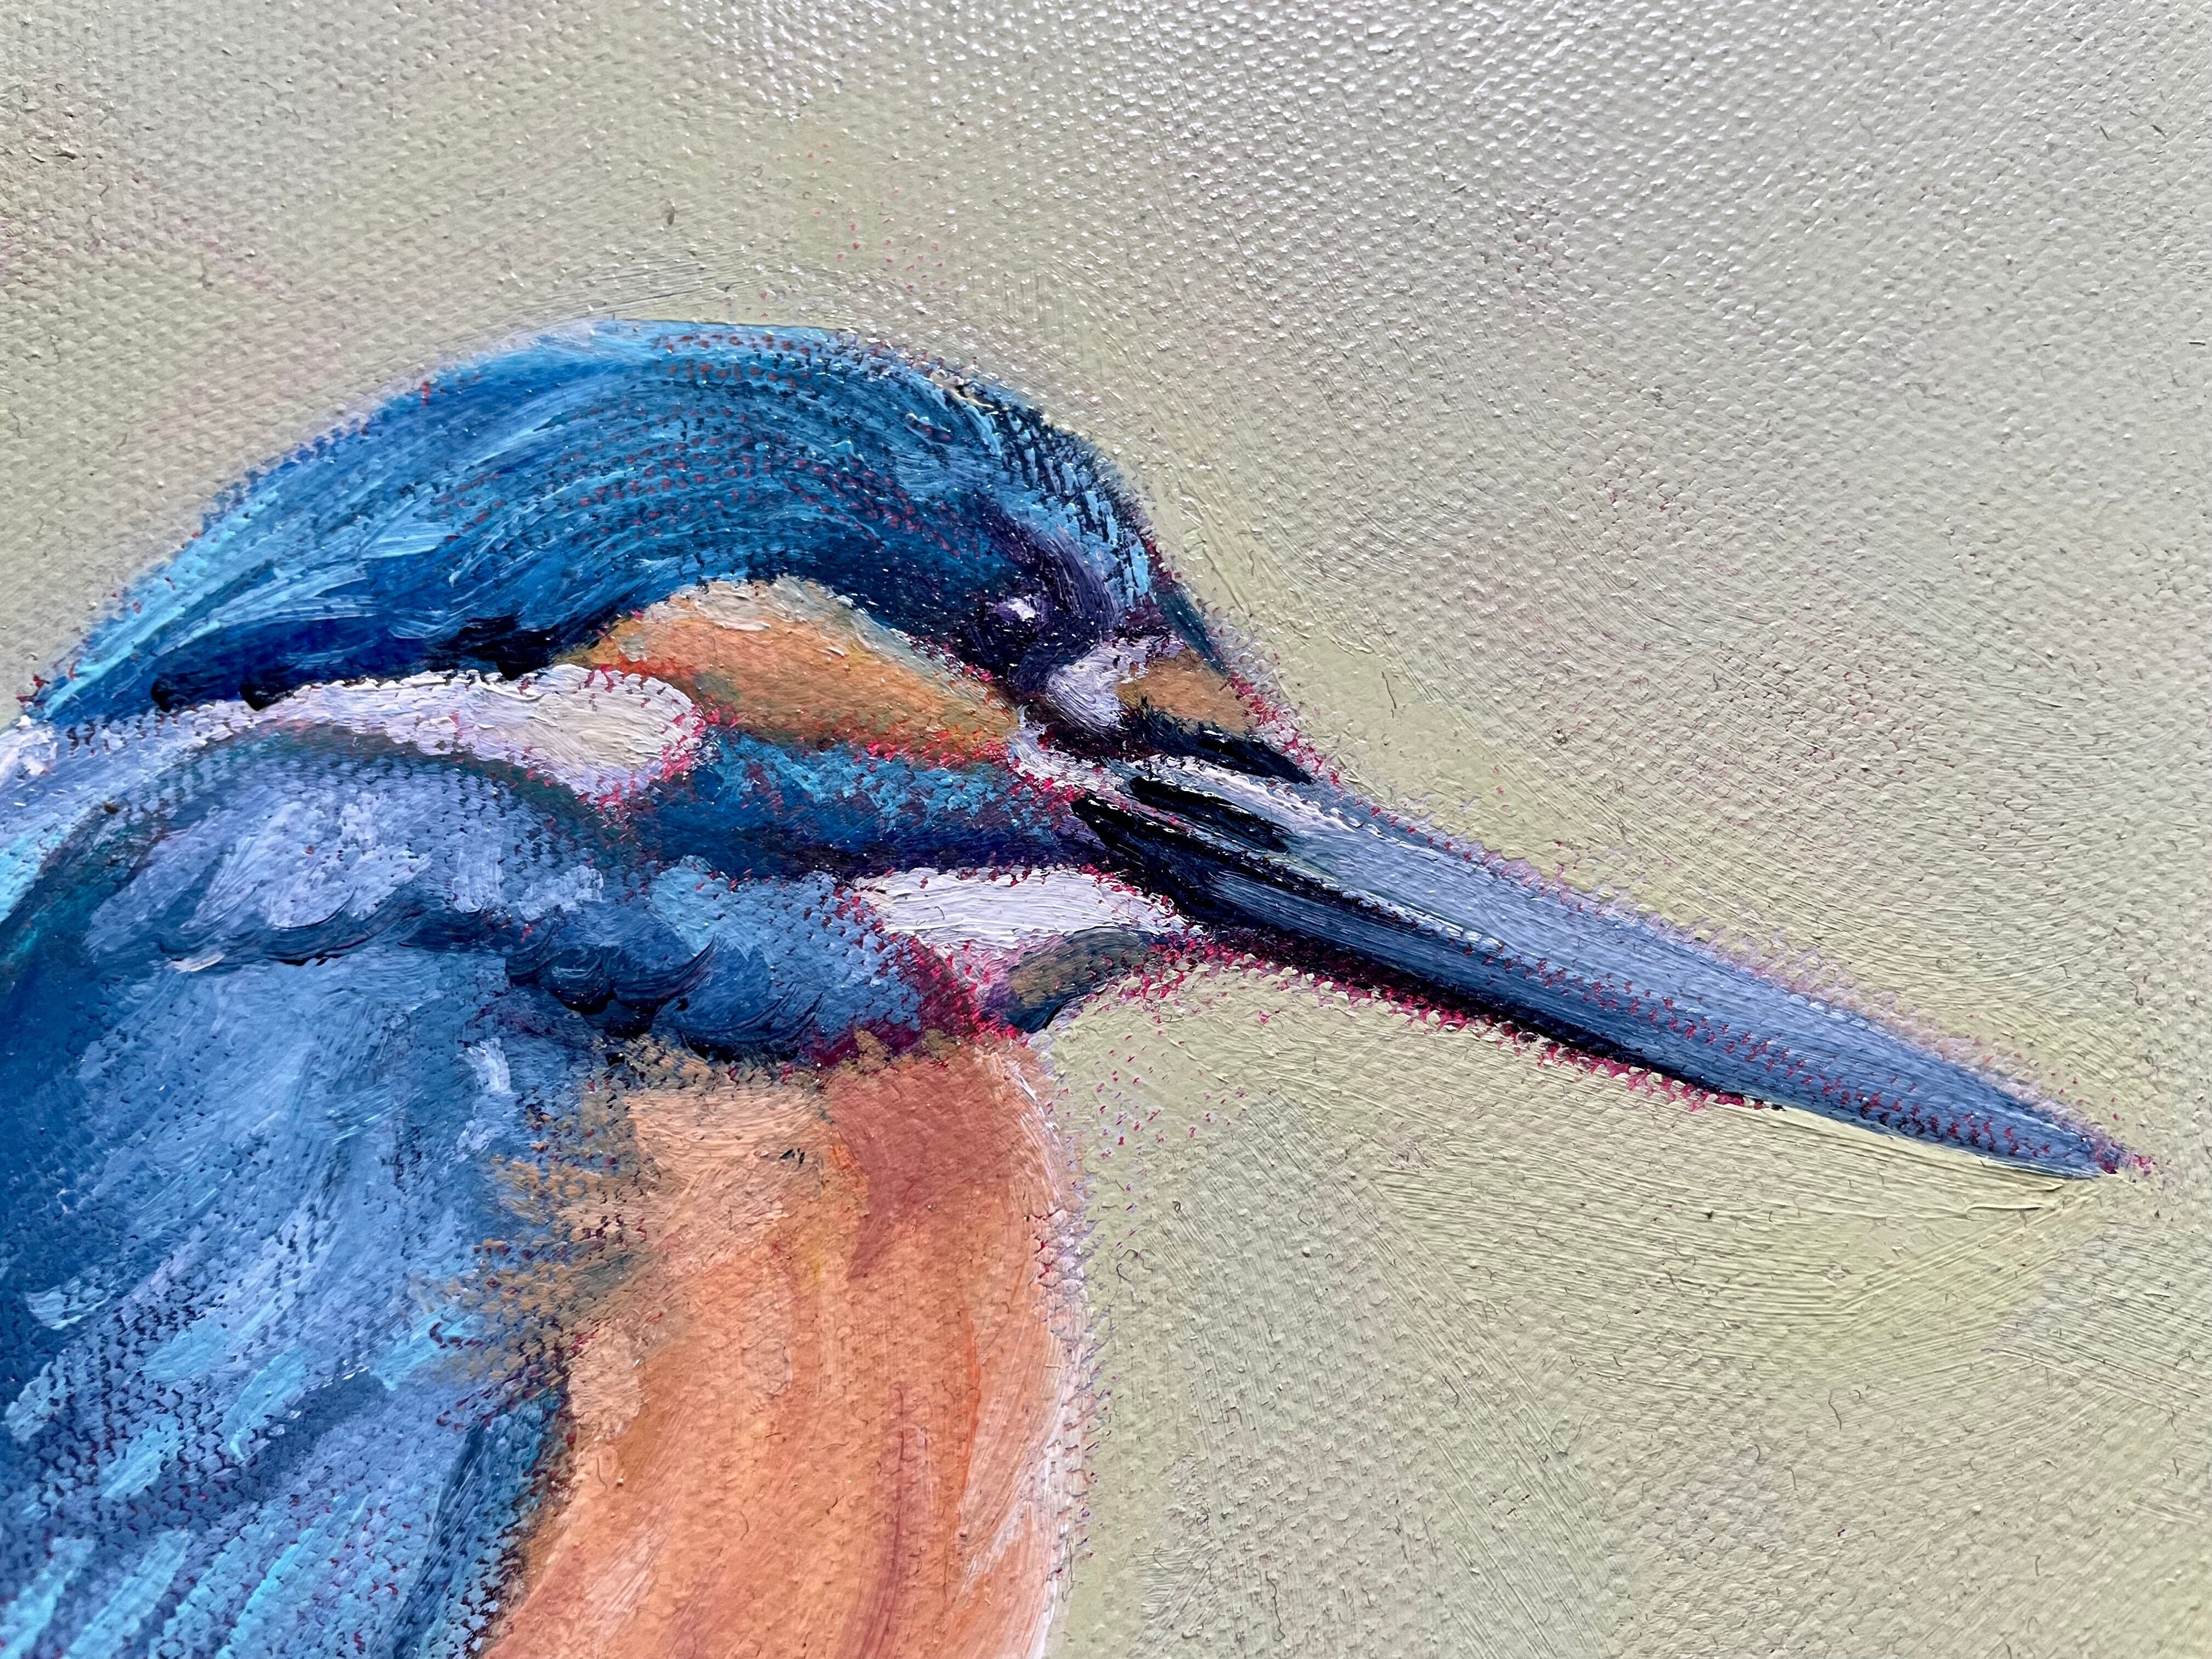 Picture "Kingfisher" (2021)